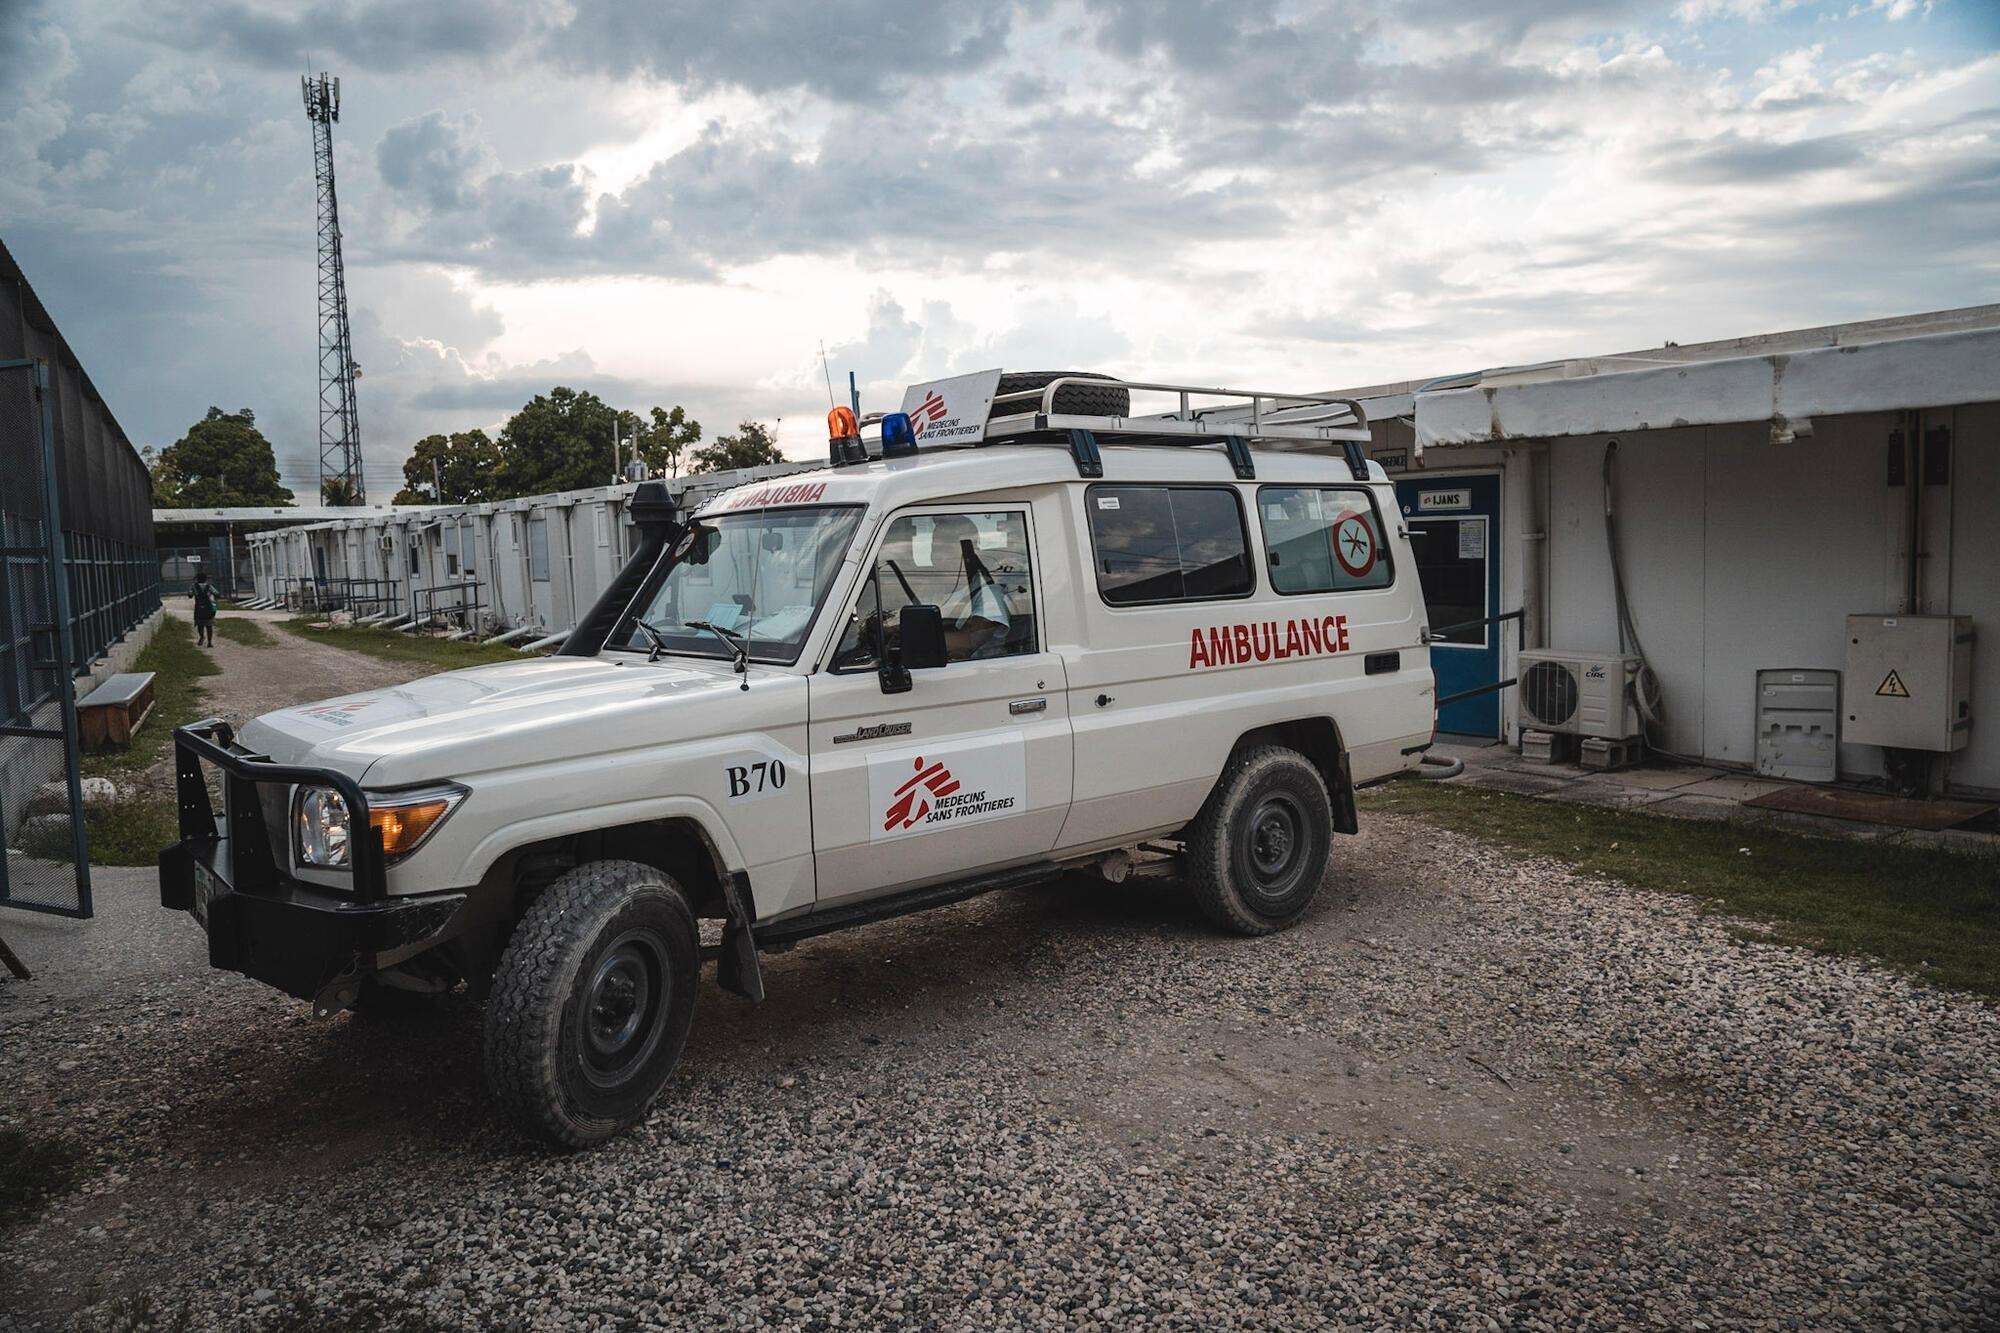 MSF's Tabarre hospital in Port-au-Prince, Haiti, received six patients from Cap-Haitien on December 14 who were injured in a fuel truck explosion.